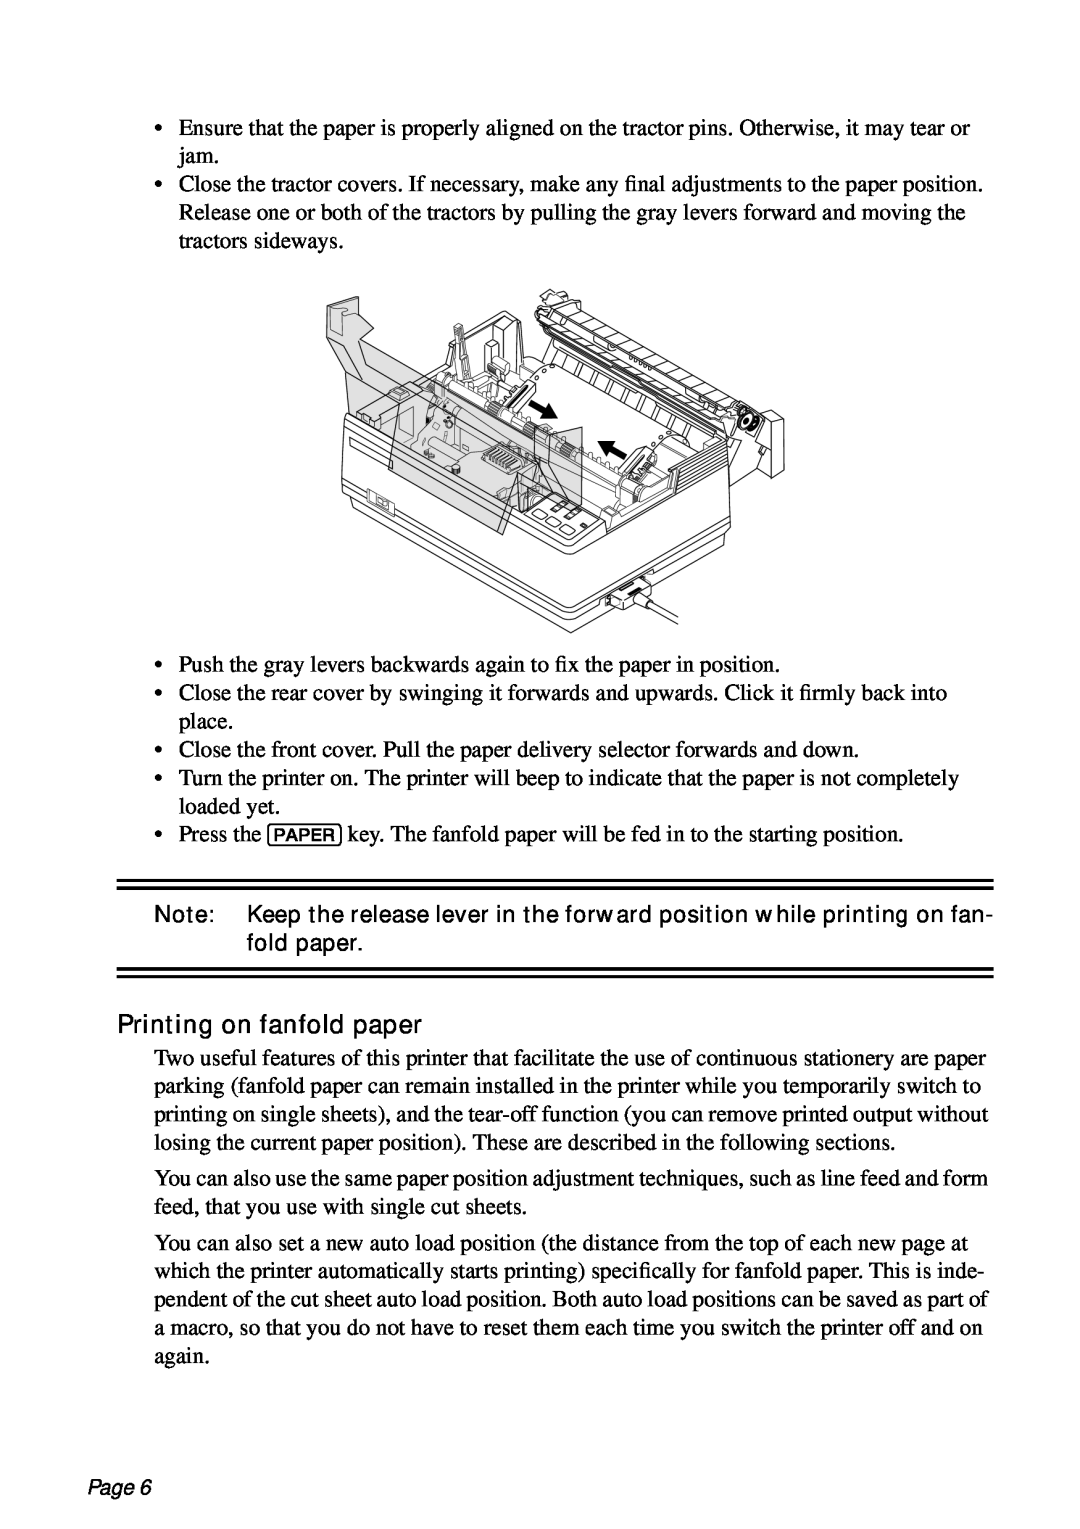 Star Micronics PT-10Q user manual Printing on fanfold paper, Page 